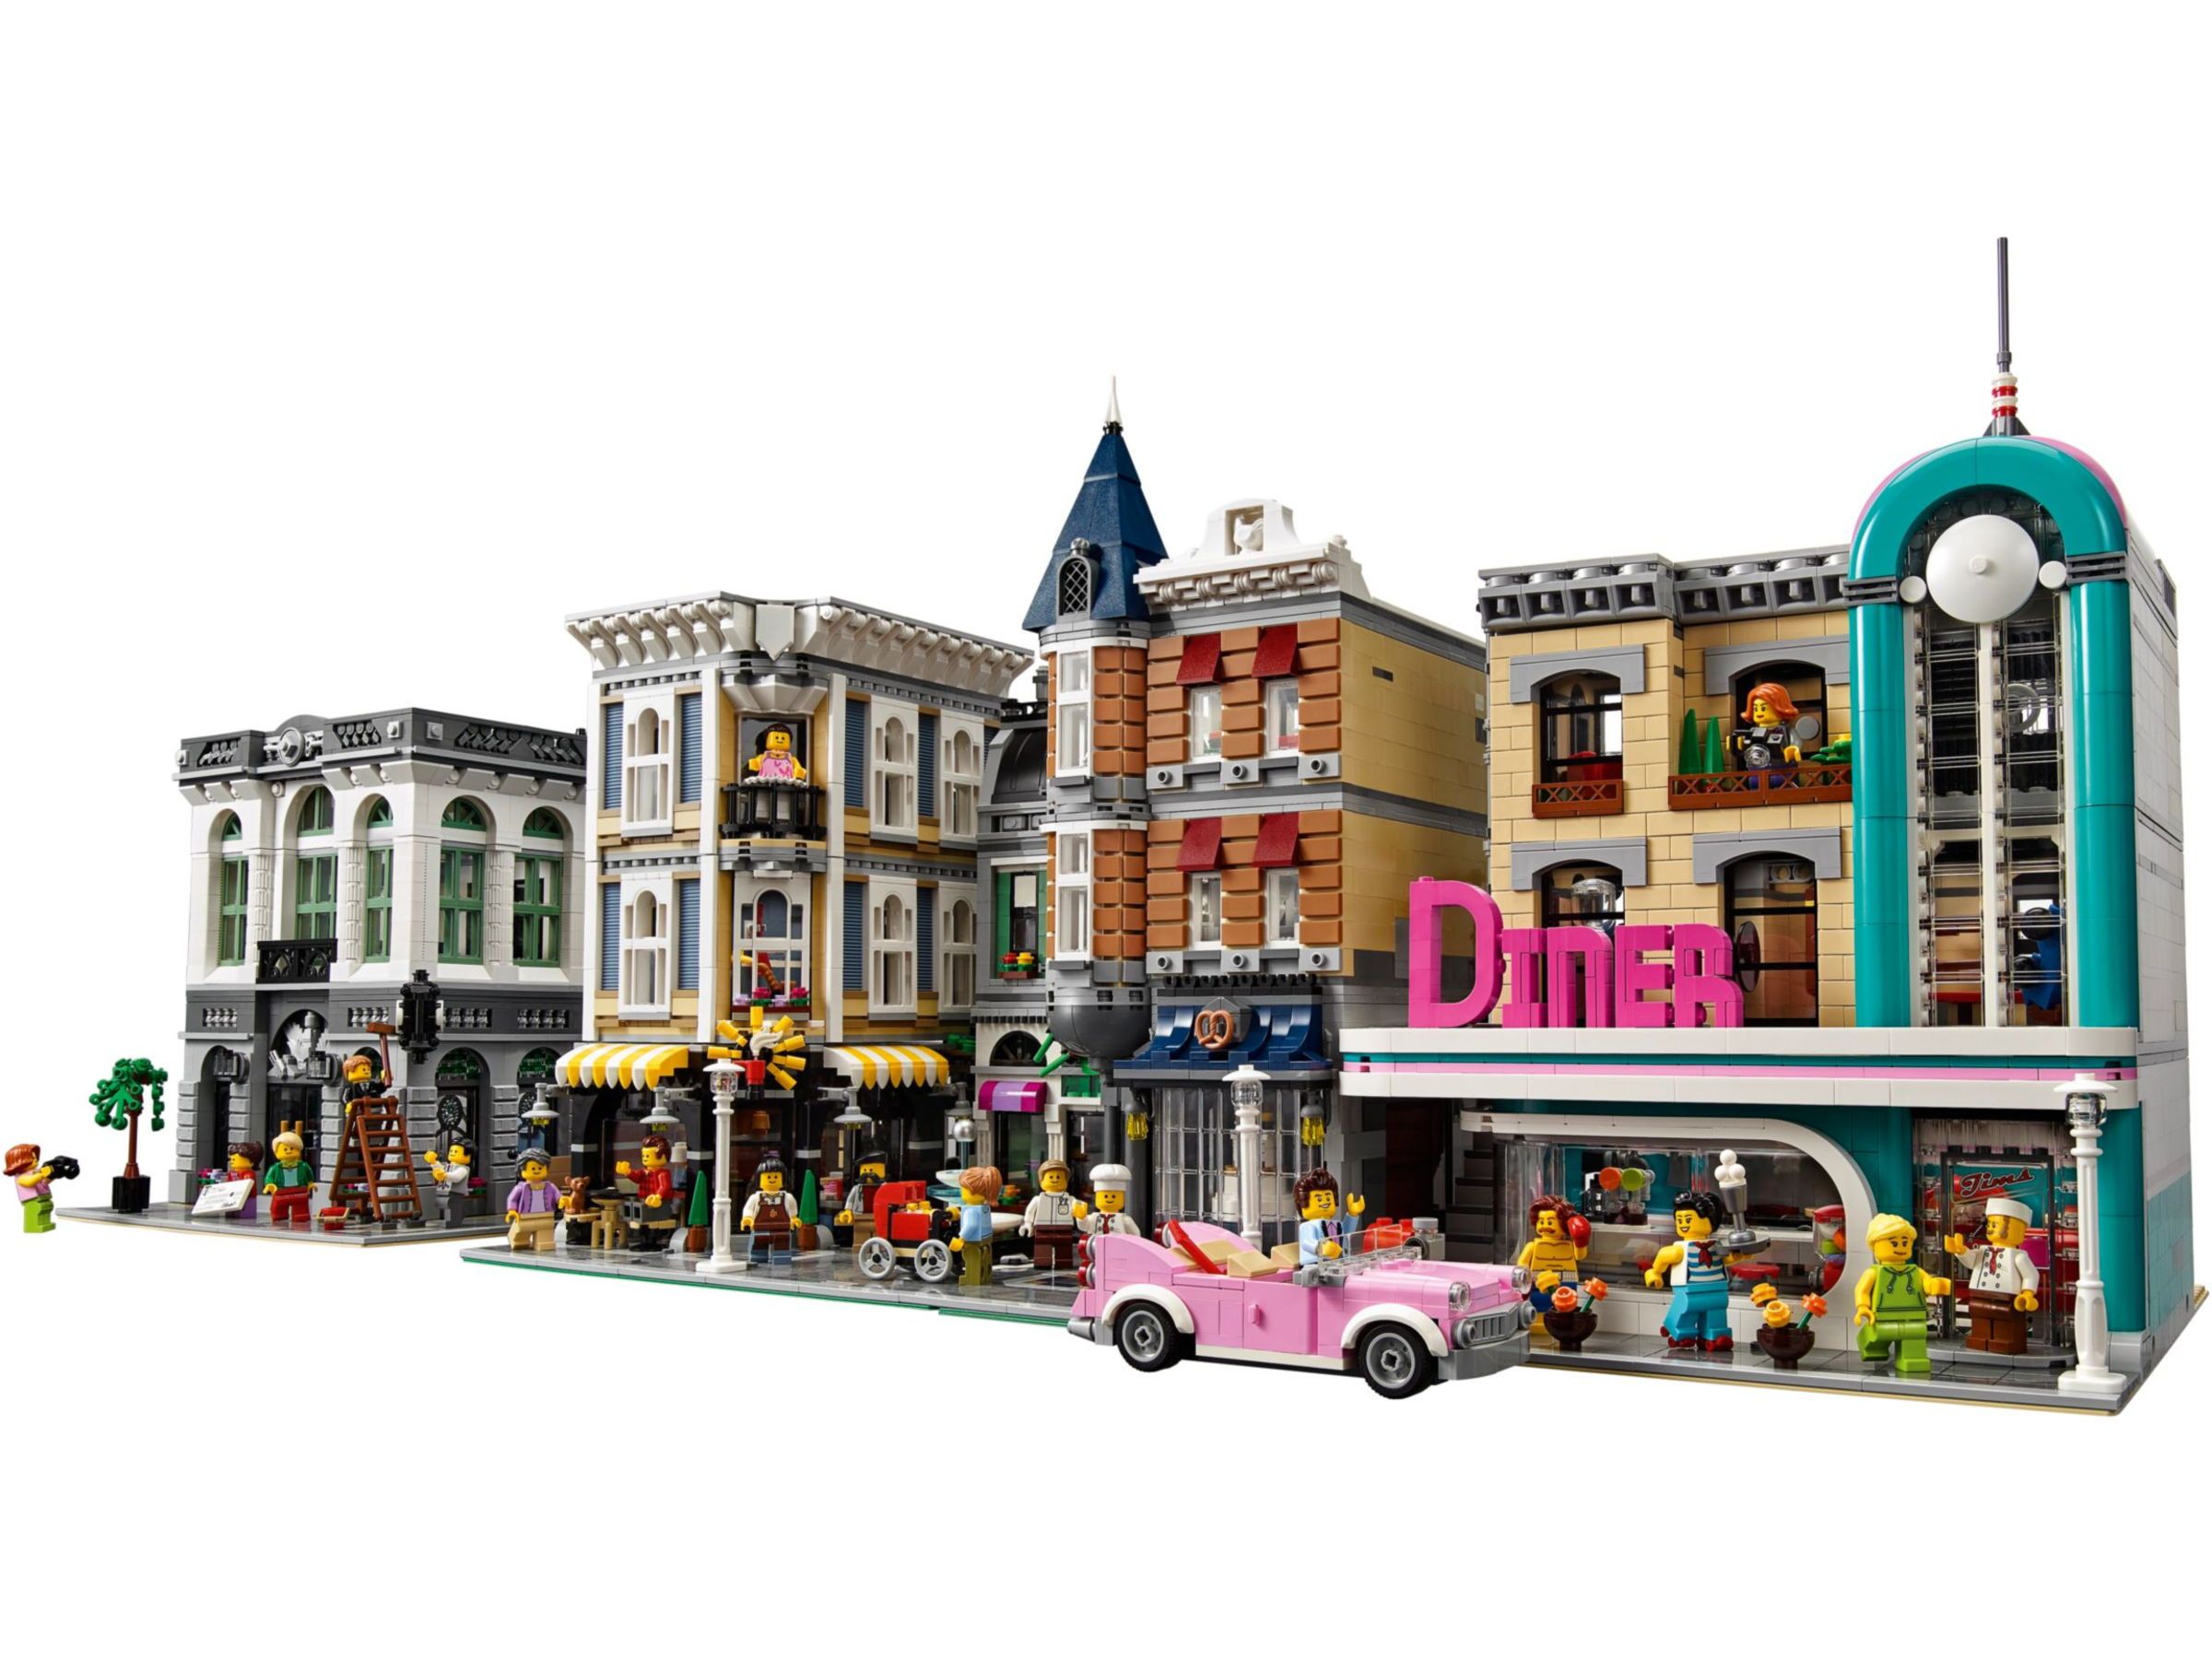 LEGO 10260 Creator Downtown Diner